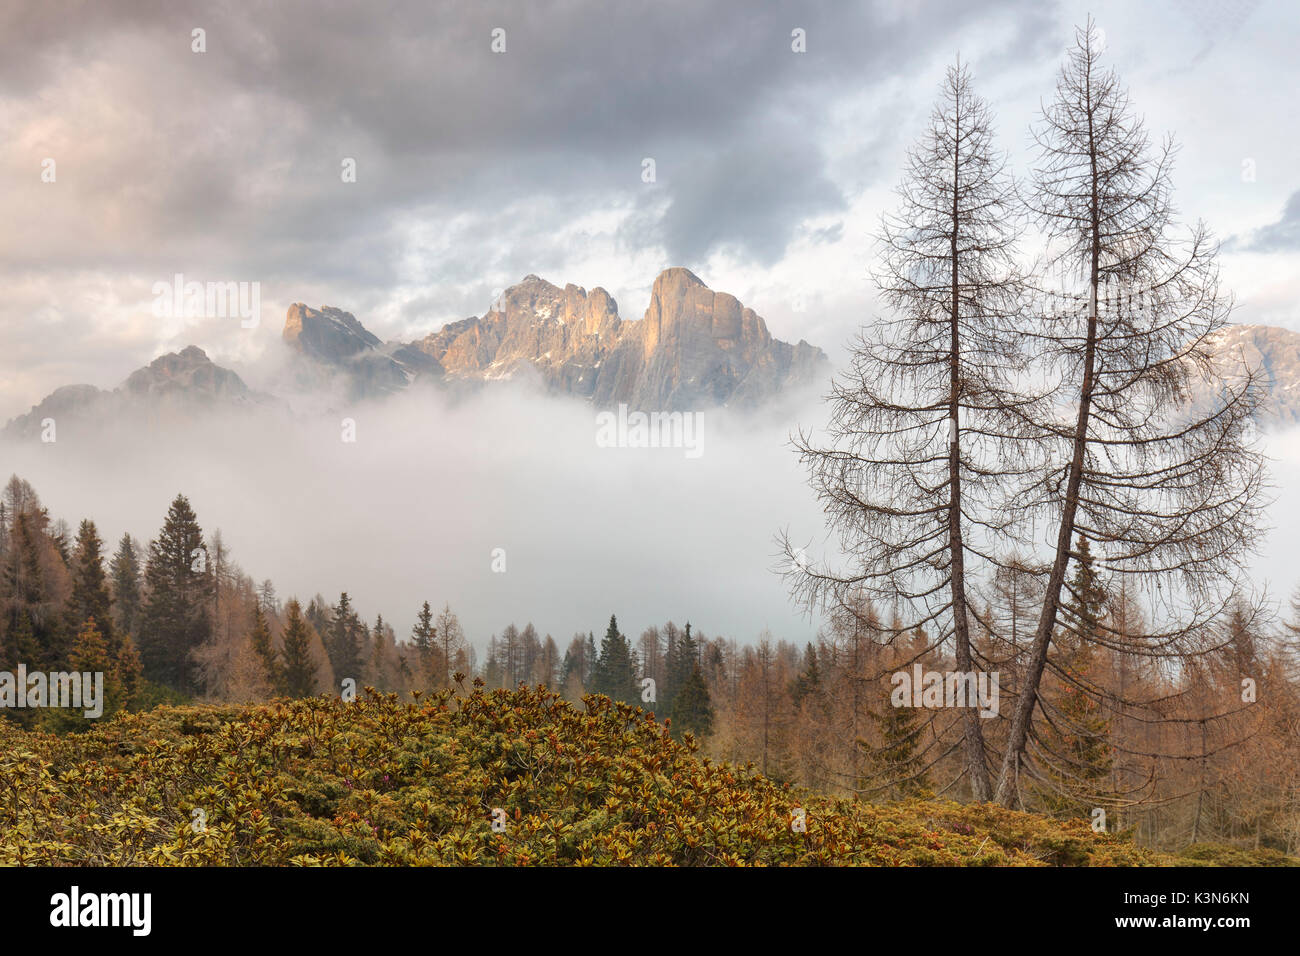 Europe, Italy, Veneto, Belluno, Agordino, Poetic landscape in the woods, in the background the Civetta mount in the clouds, Dolomites Stock Photo